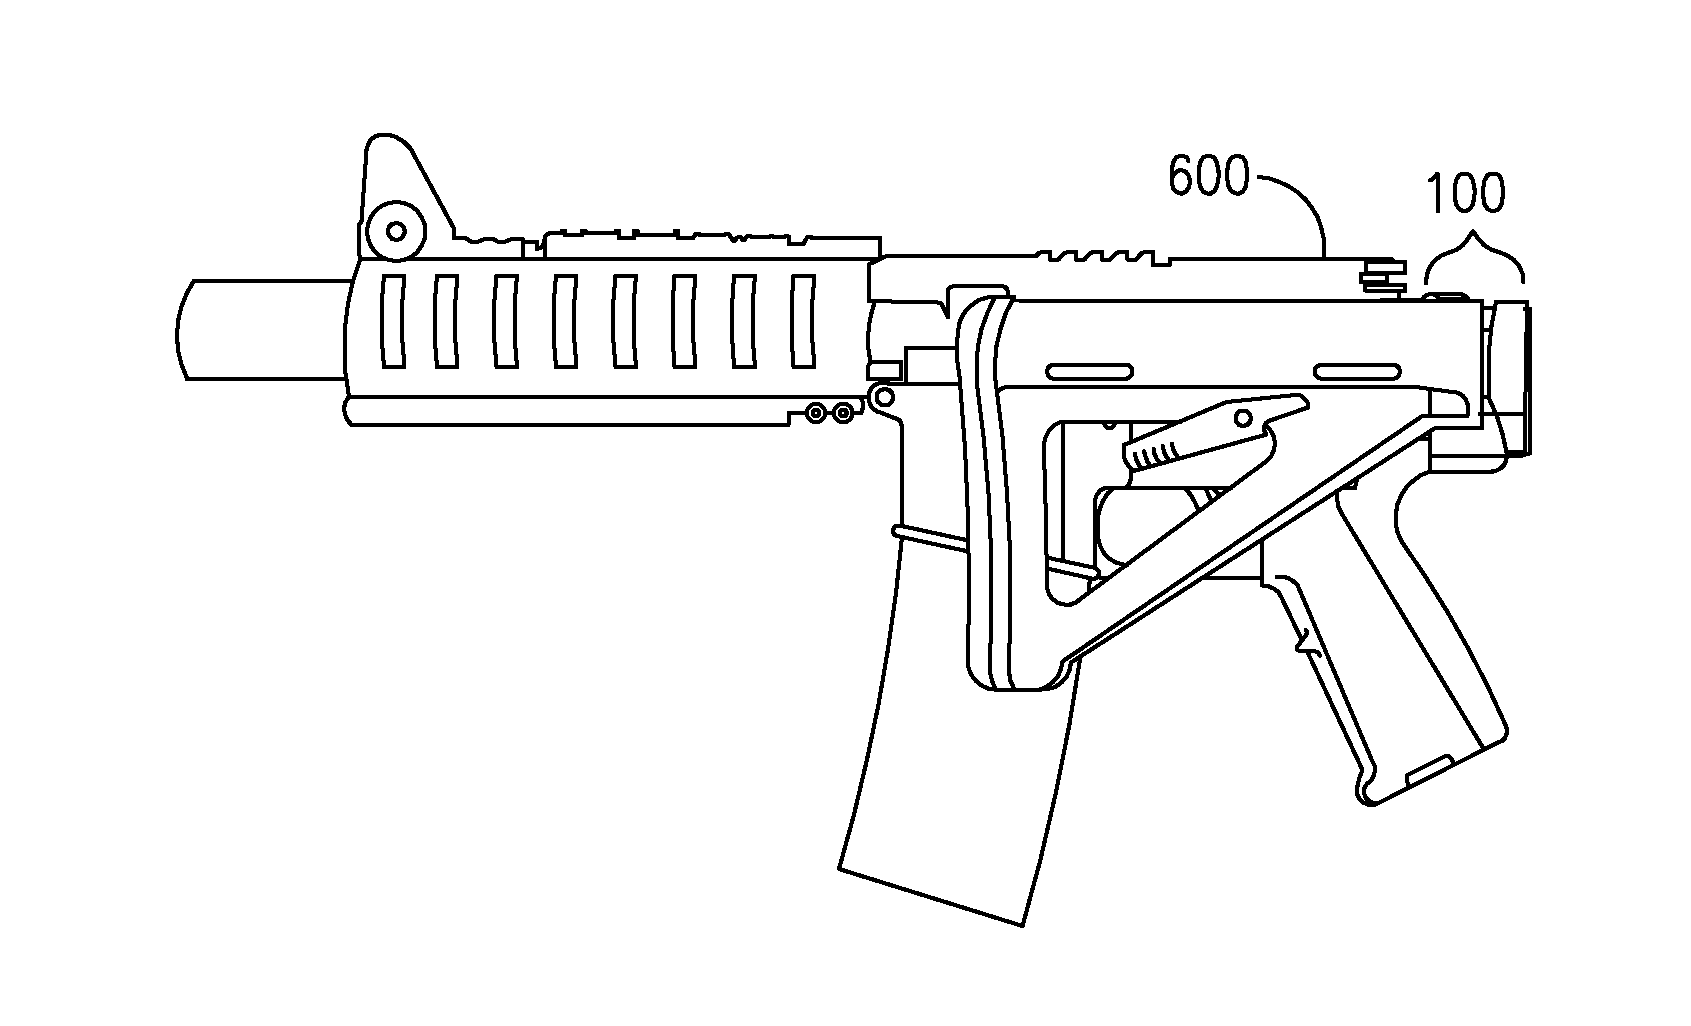 Folding stock adaptor for military-style assault rifles and a method for its use